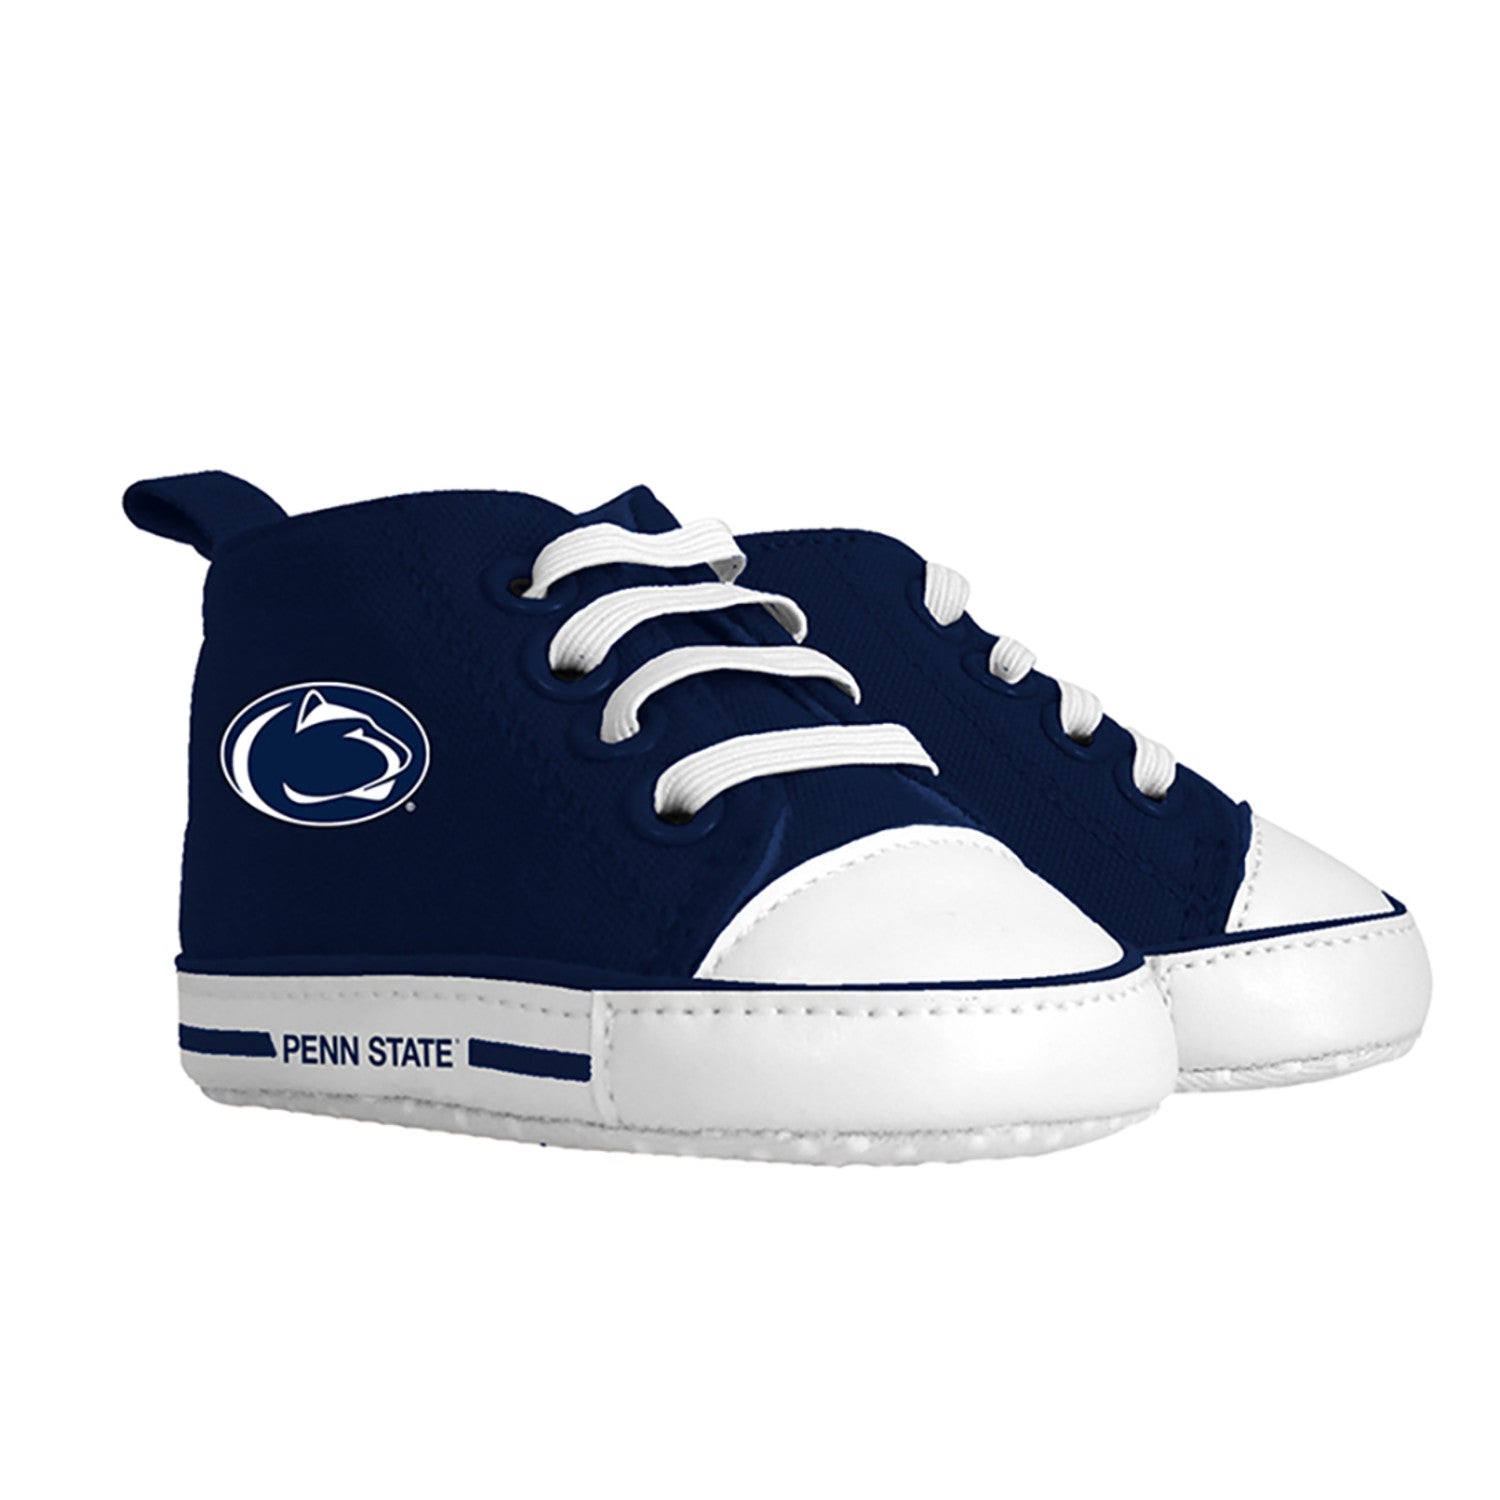 Penn State Nittany Lions - 2-Piece Baby Gift Set